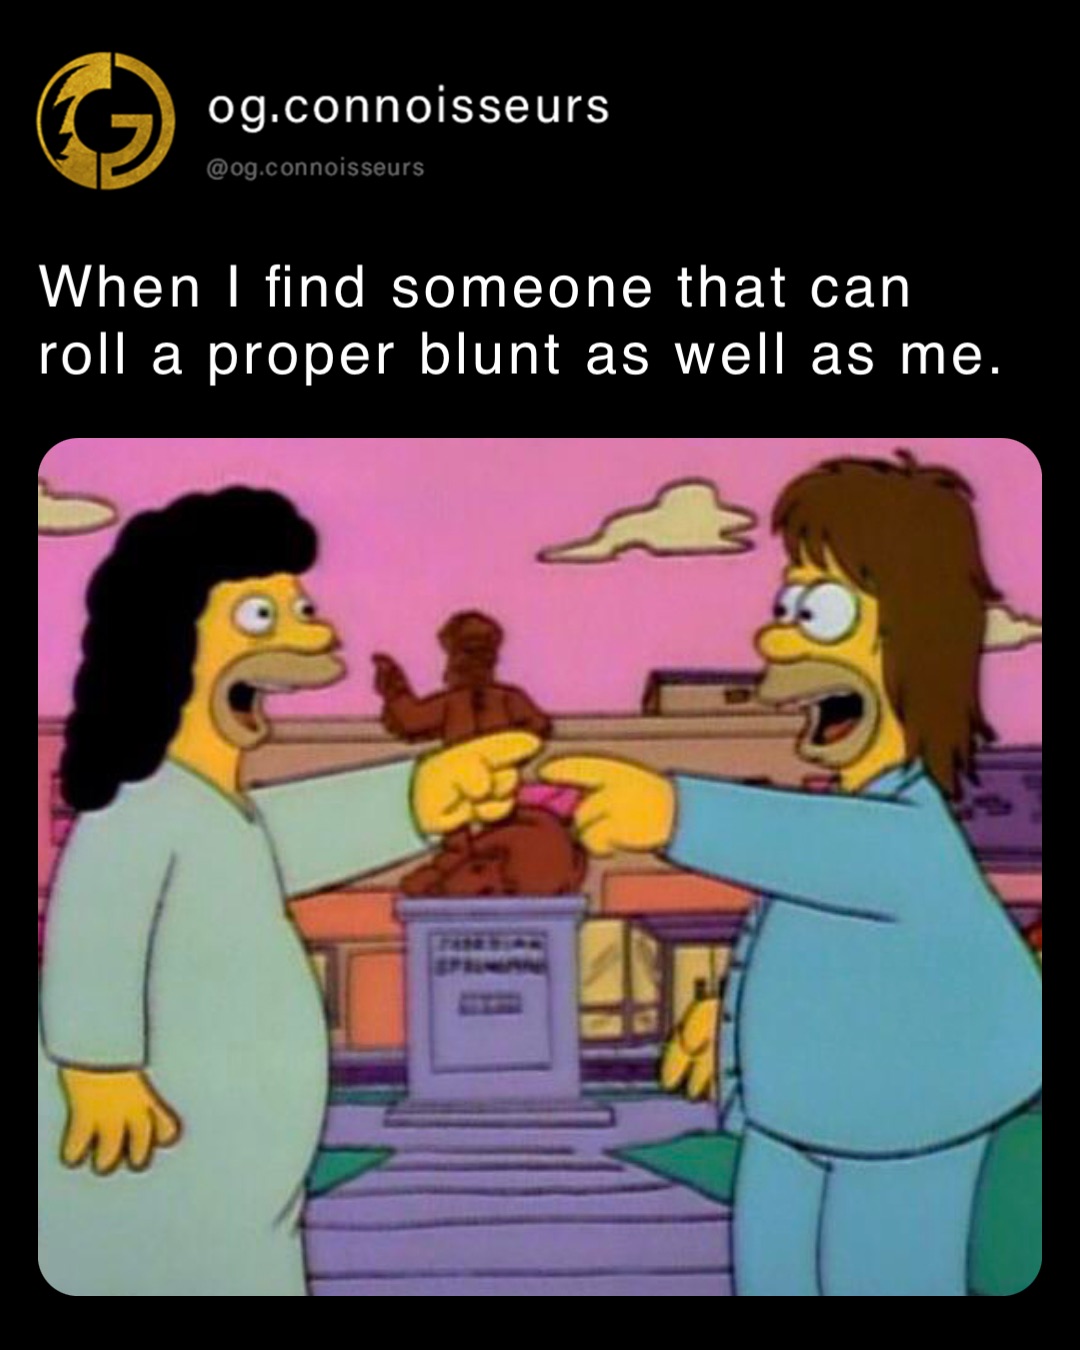 When I find someone that can roll a proper blunt as well as me.